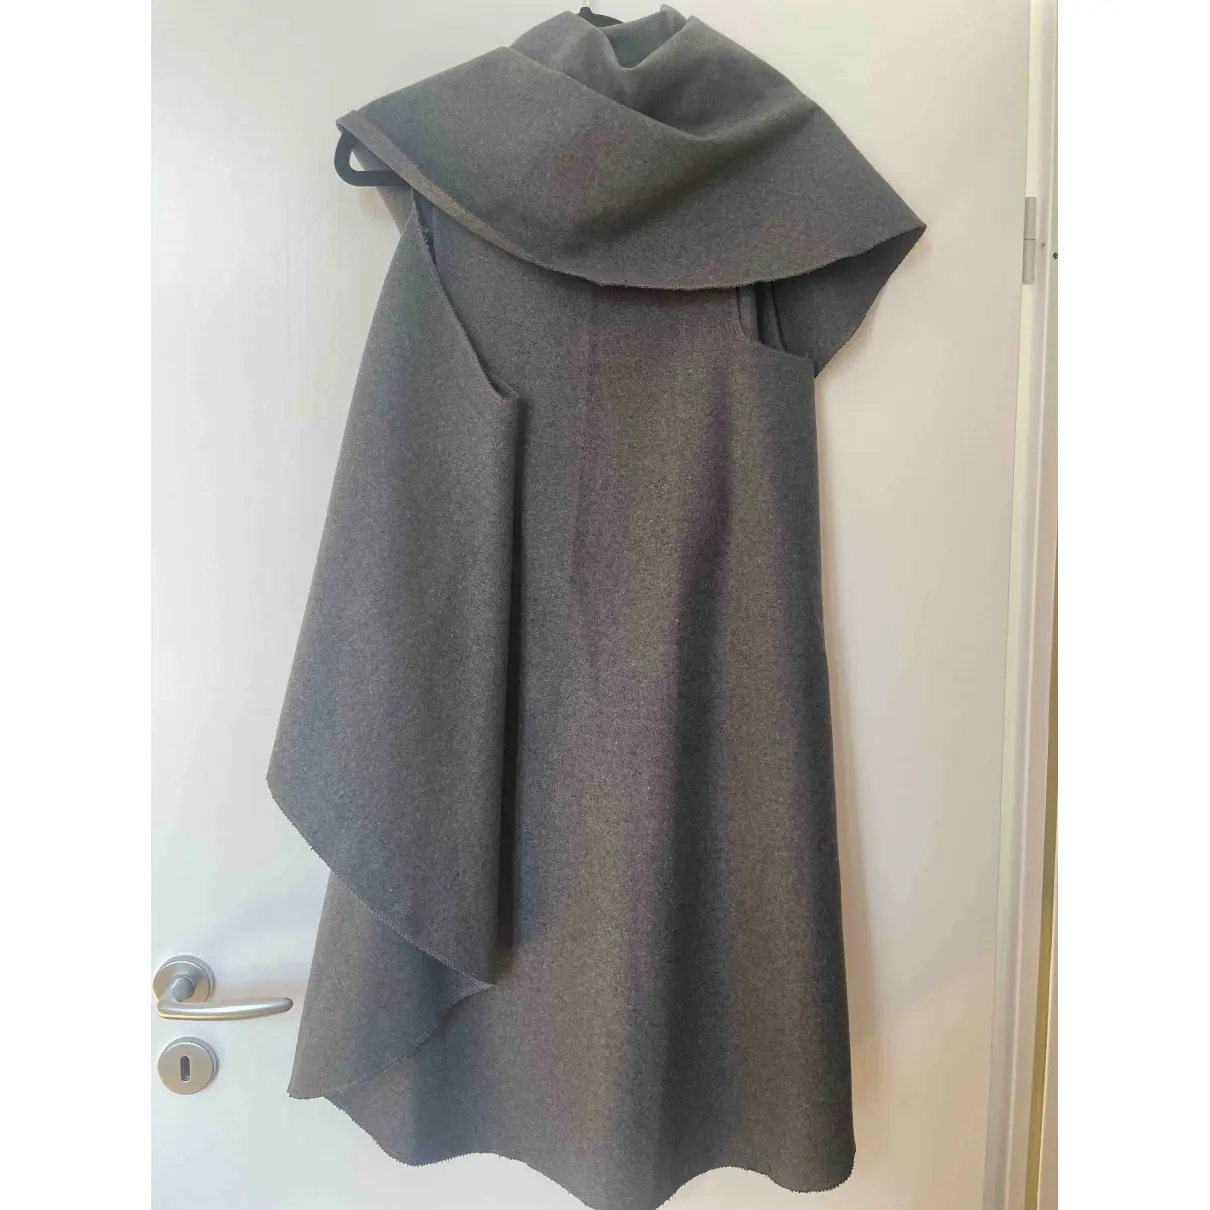 Buy Source Unknown Wool cape online